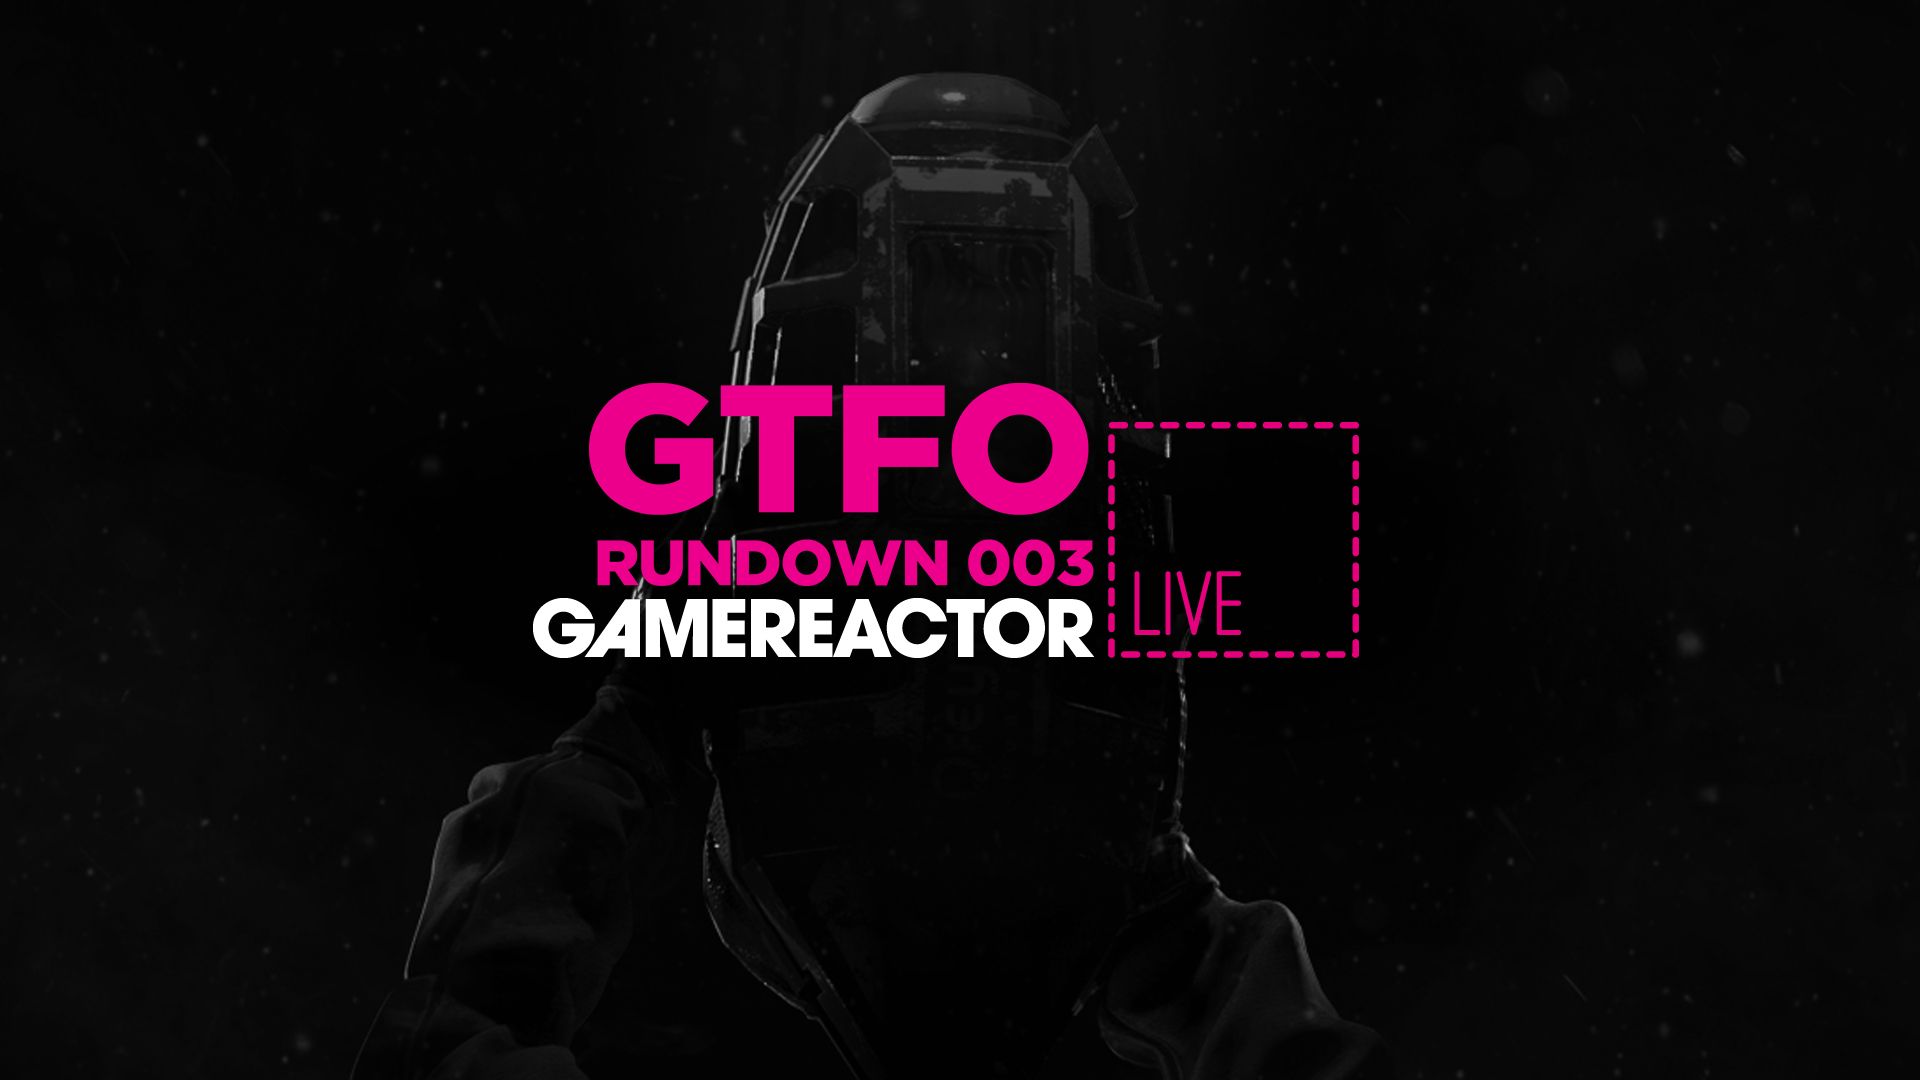 We're playing GTFO's latest rundown on today's stream